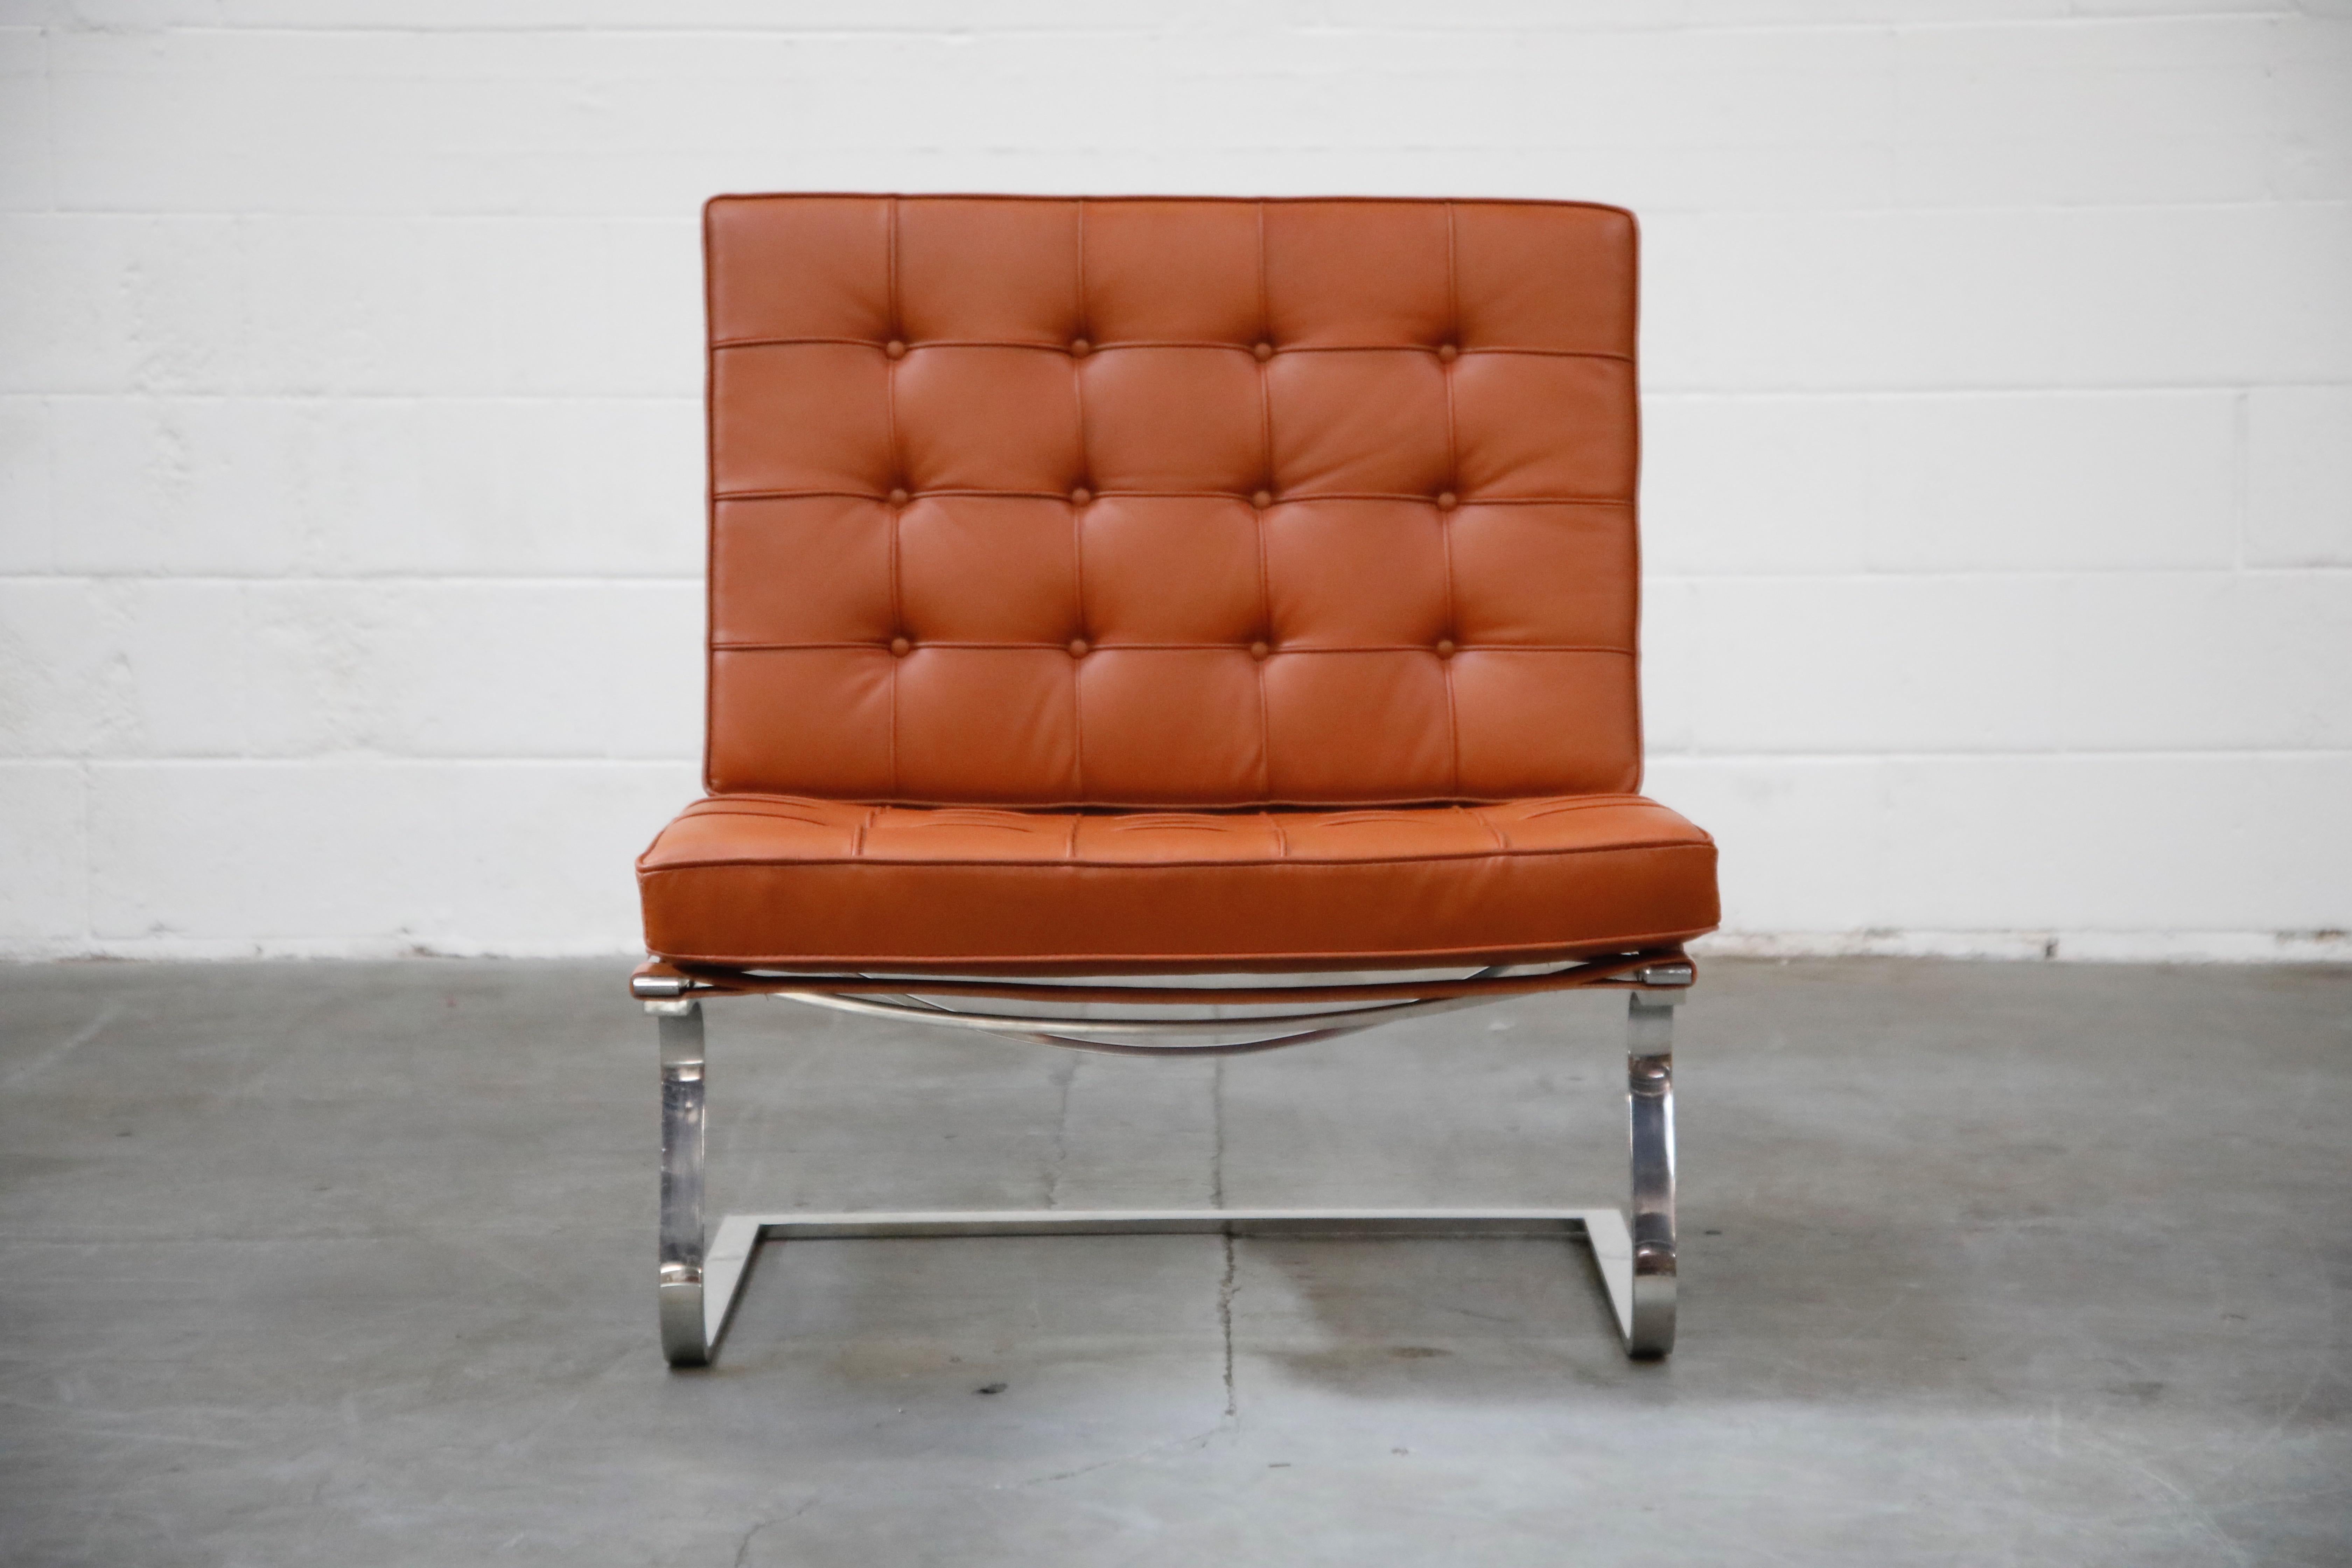 This rare and spectacular 'Tugendhat' lounge chair, Model MR70, by Ludwig Mies van der Rohe for Knoll Associates, circa 1960, is signed with original Knoll Associates label under the seat cushion. This fantastic cantilevered lounge chair is similar